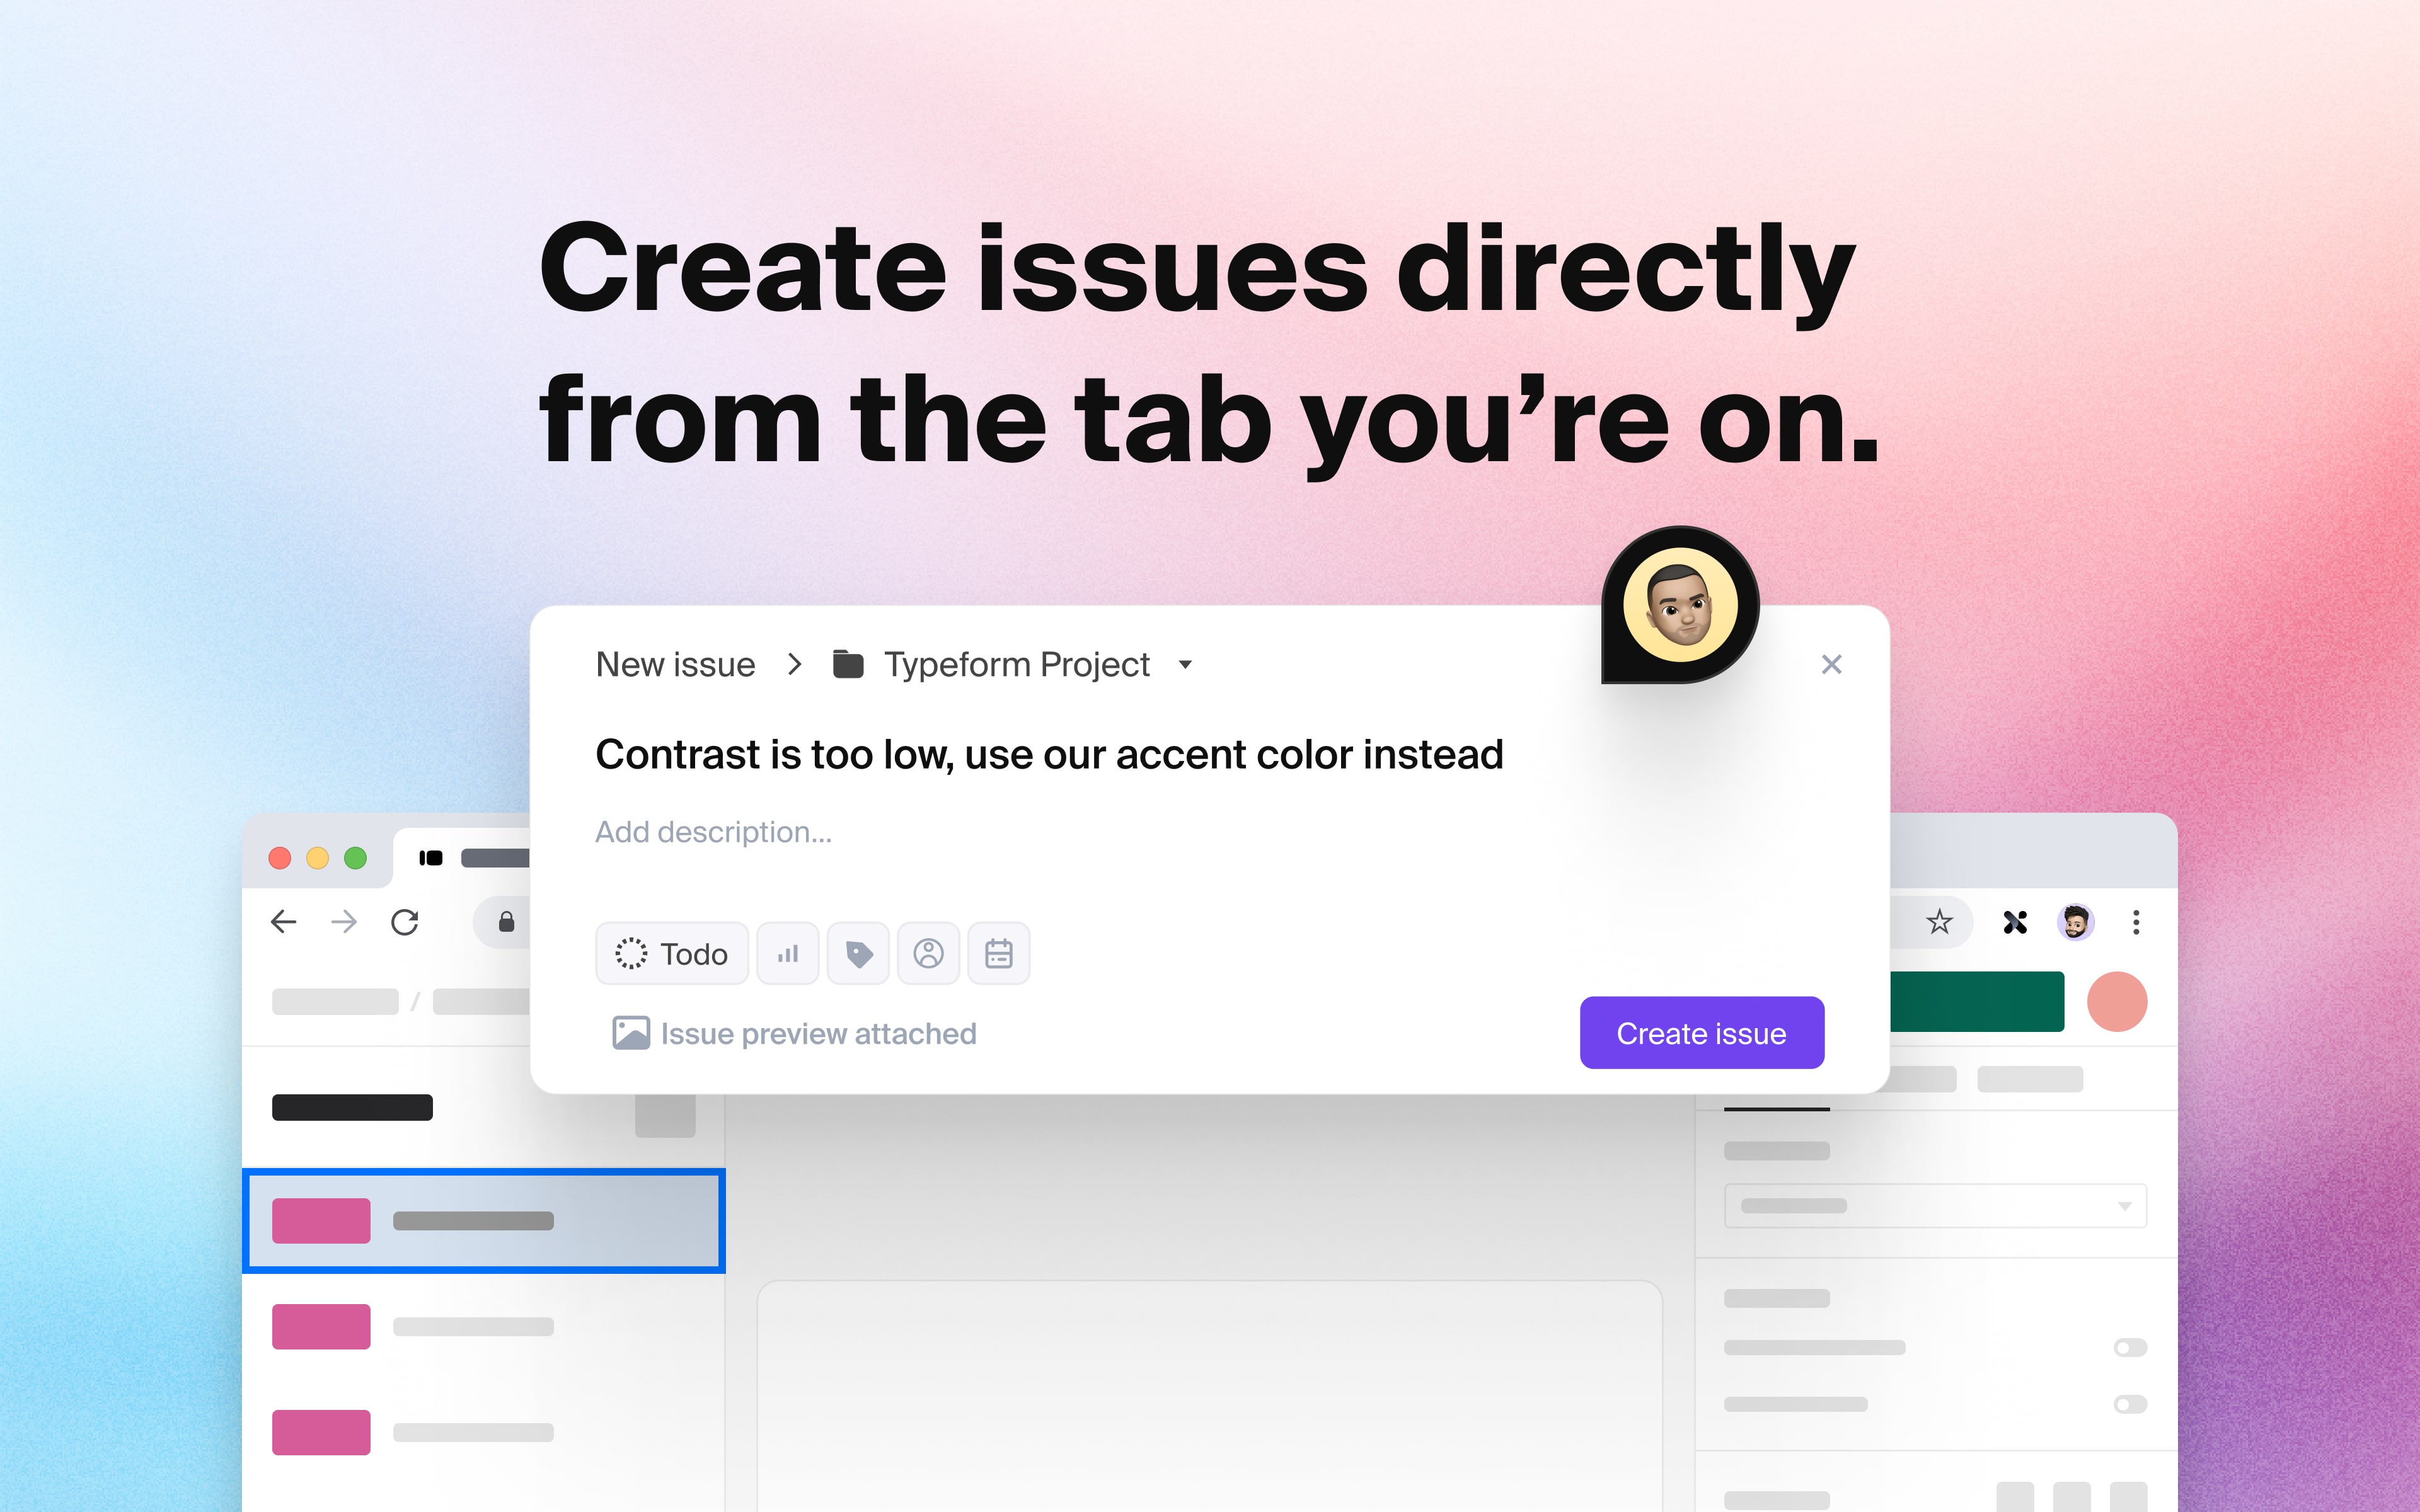 Capture issues directly from the tab you're on.